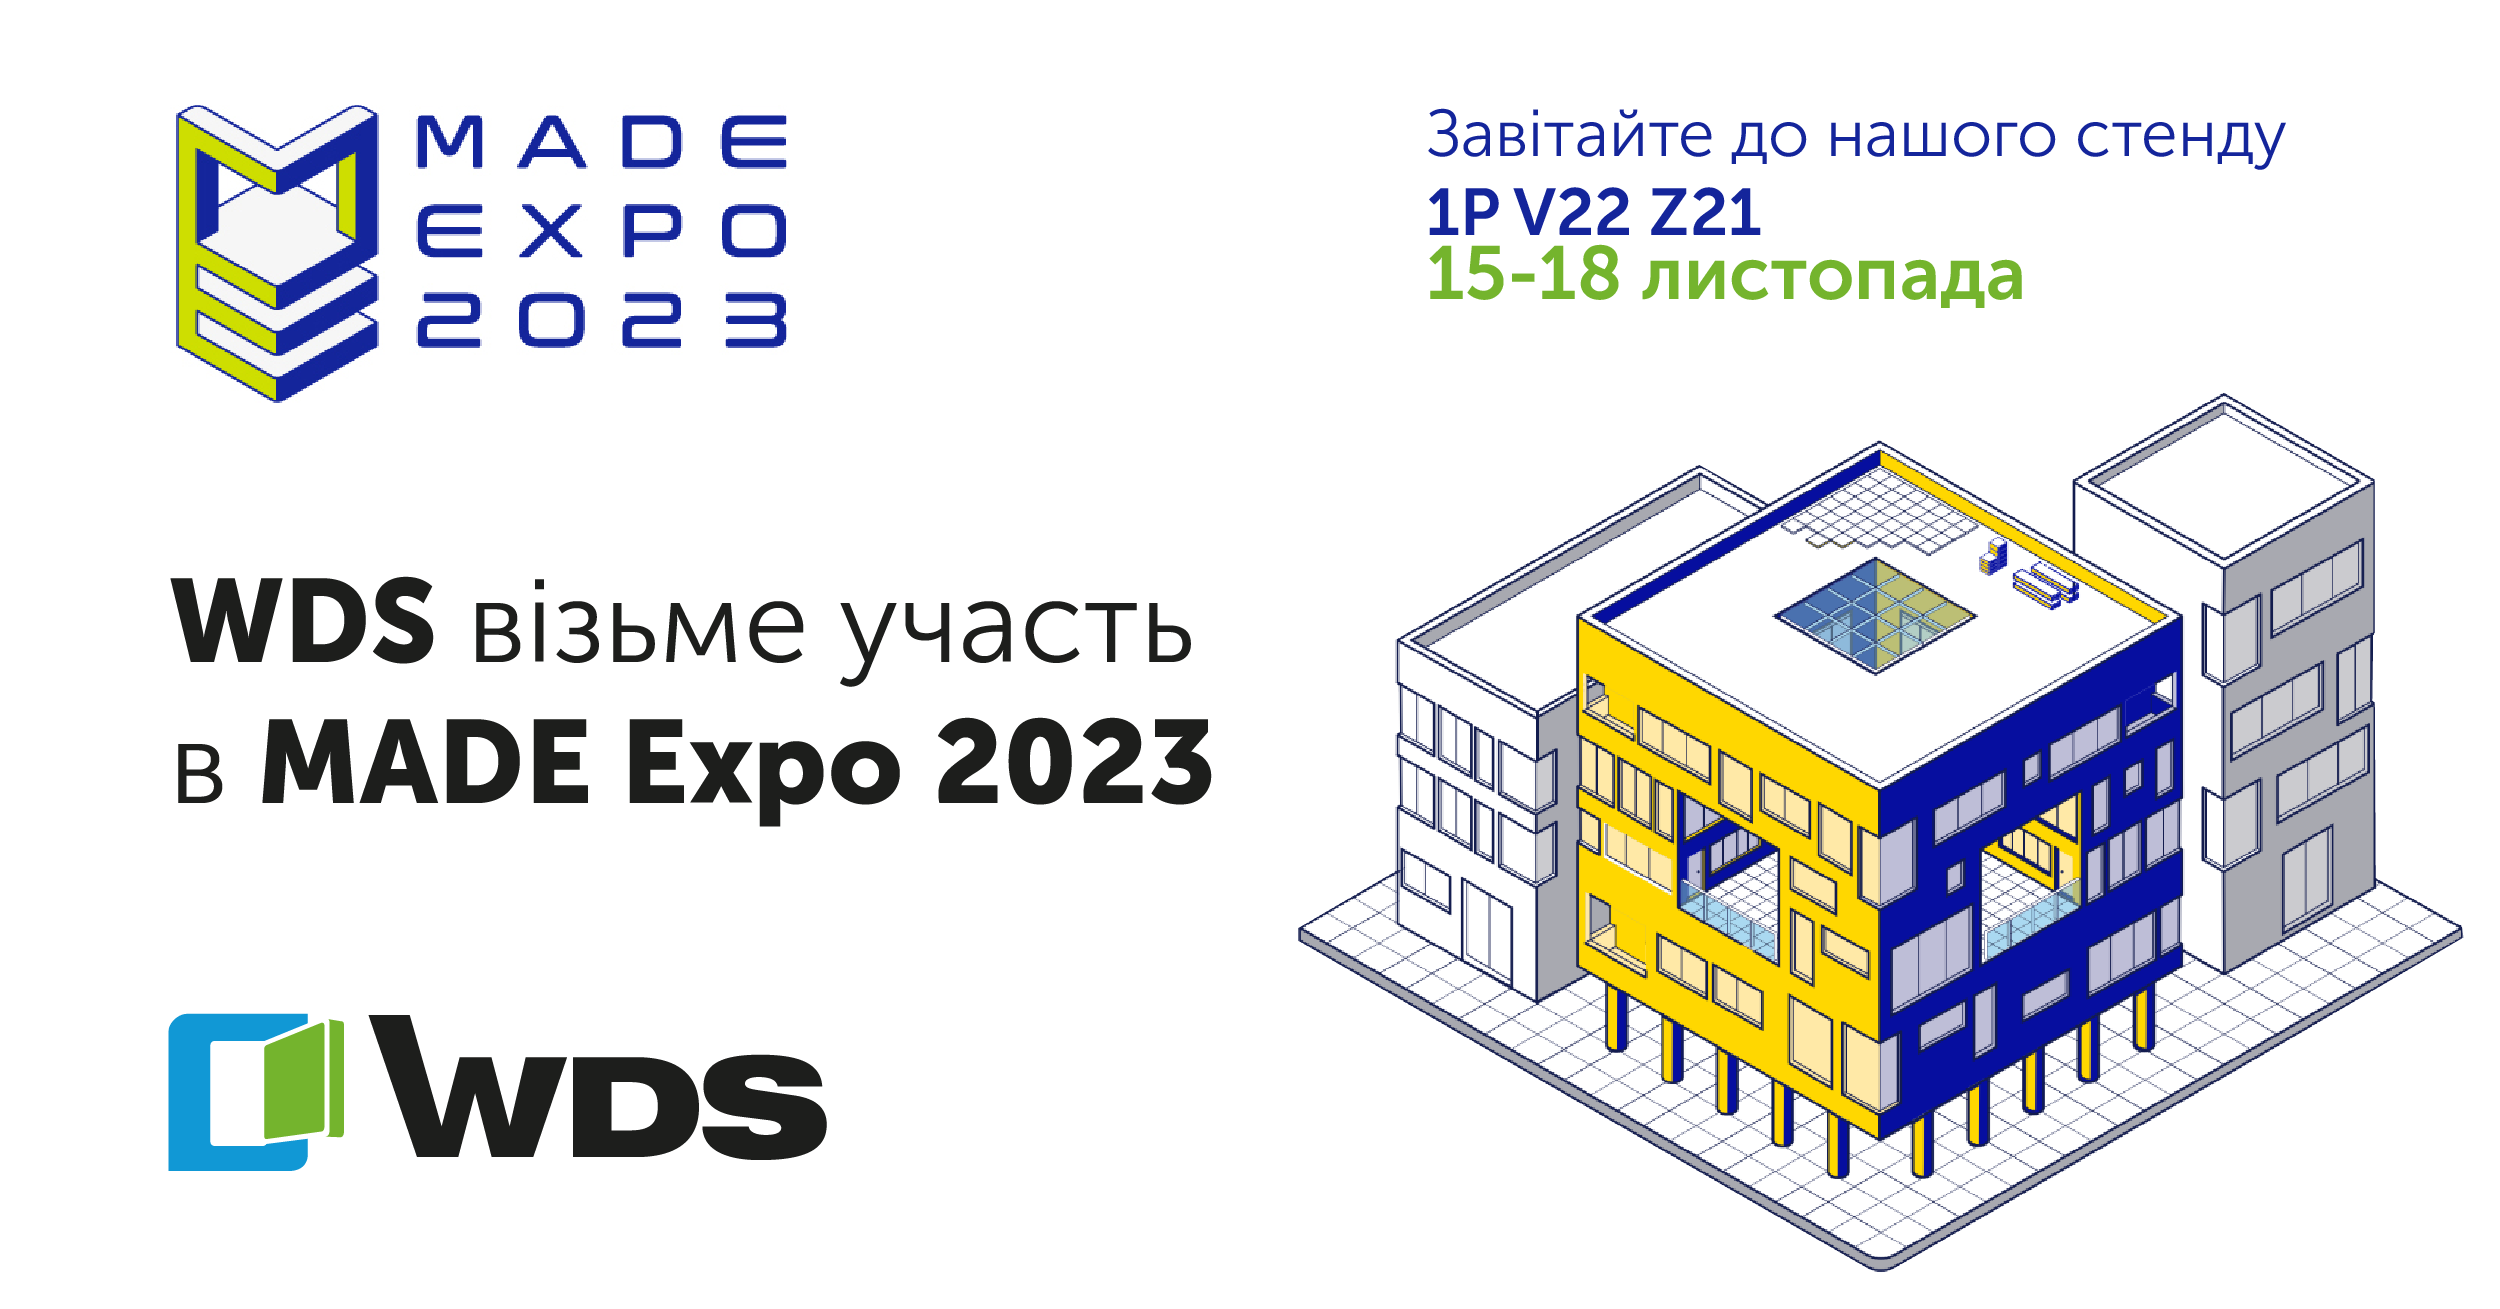 WDS participates in the MADE expo 2023